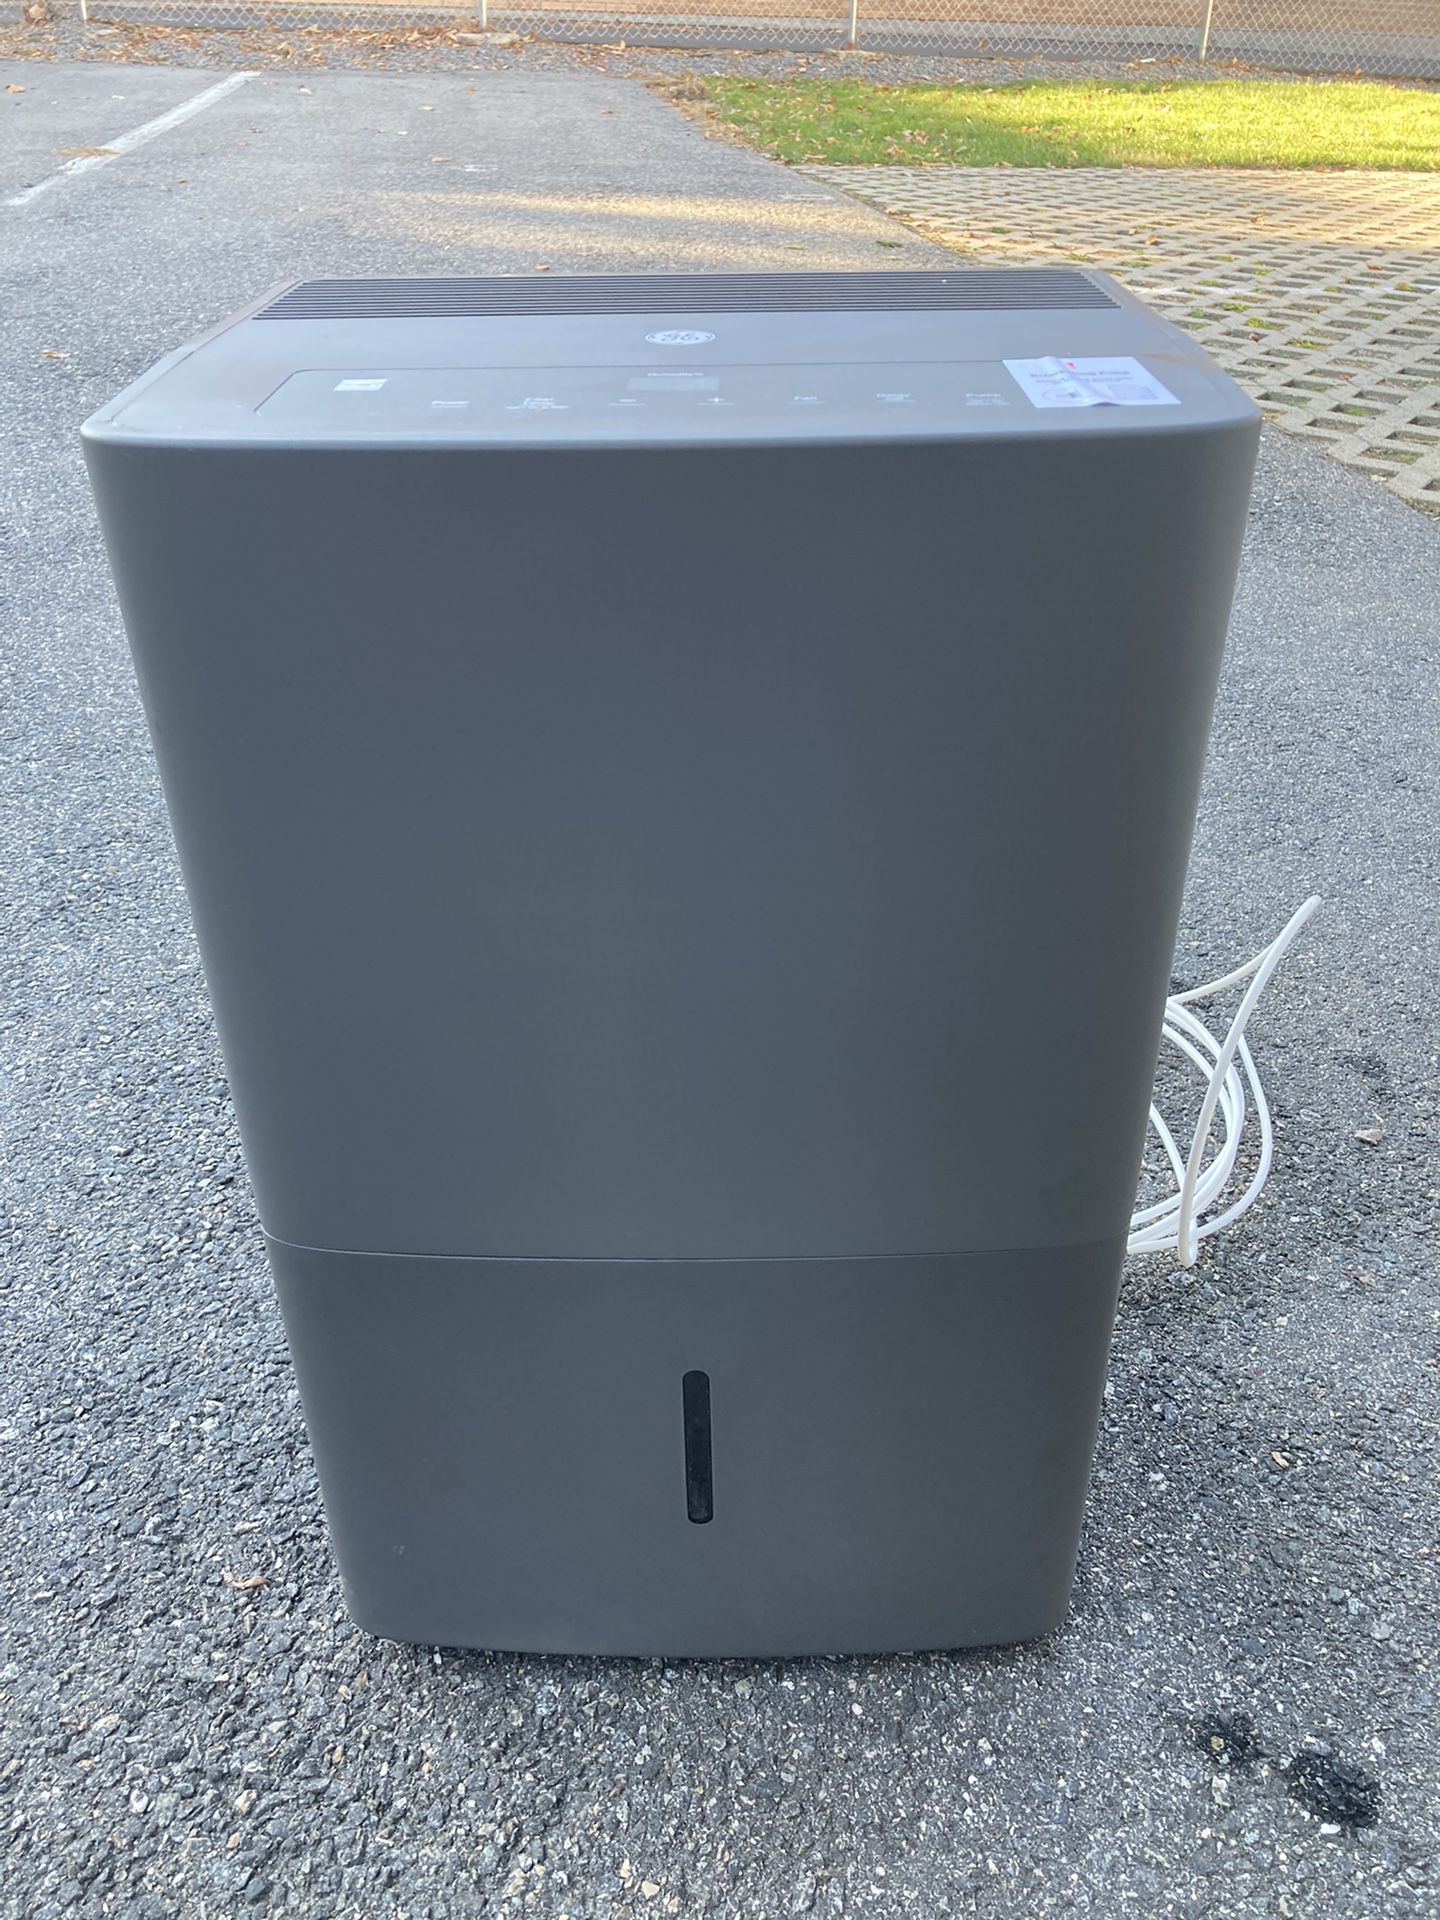 GE 45 Pt Dehumidifier With Pump